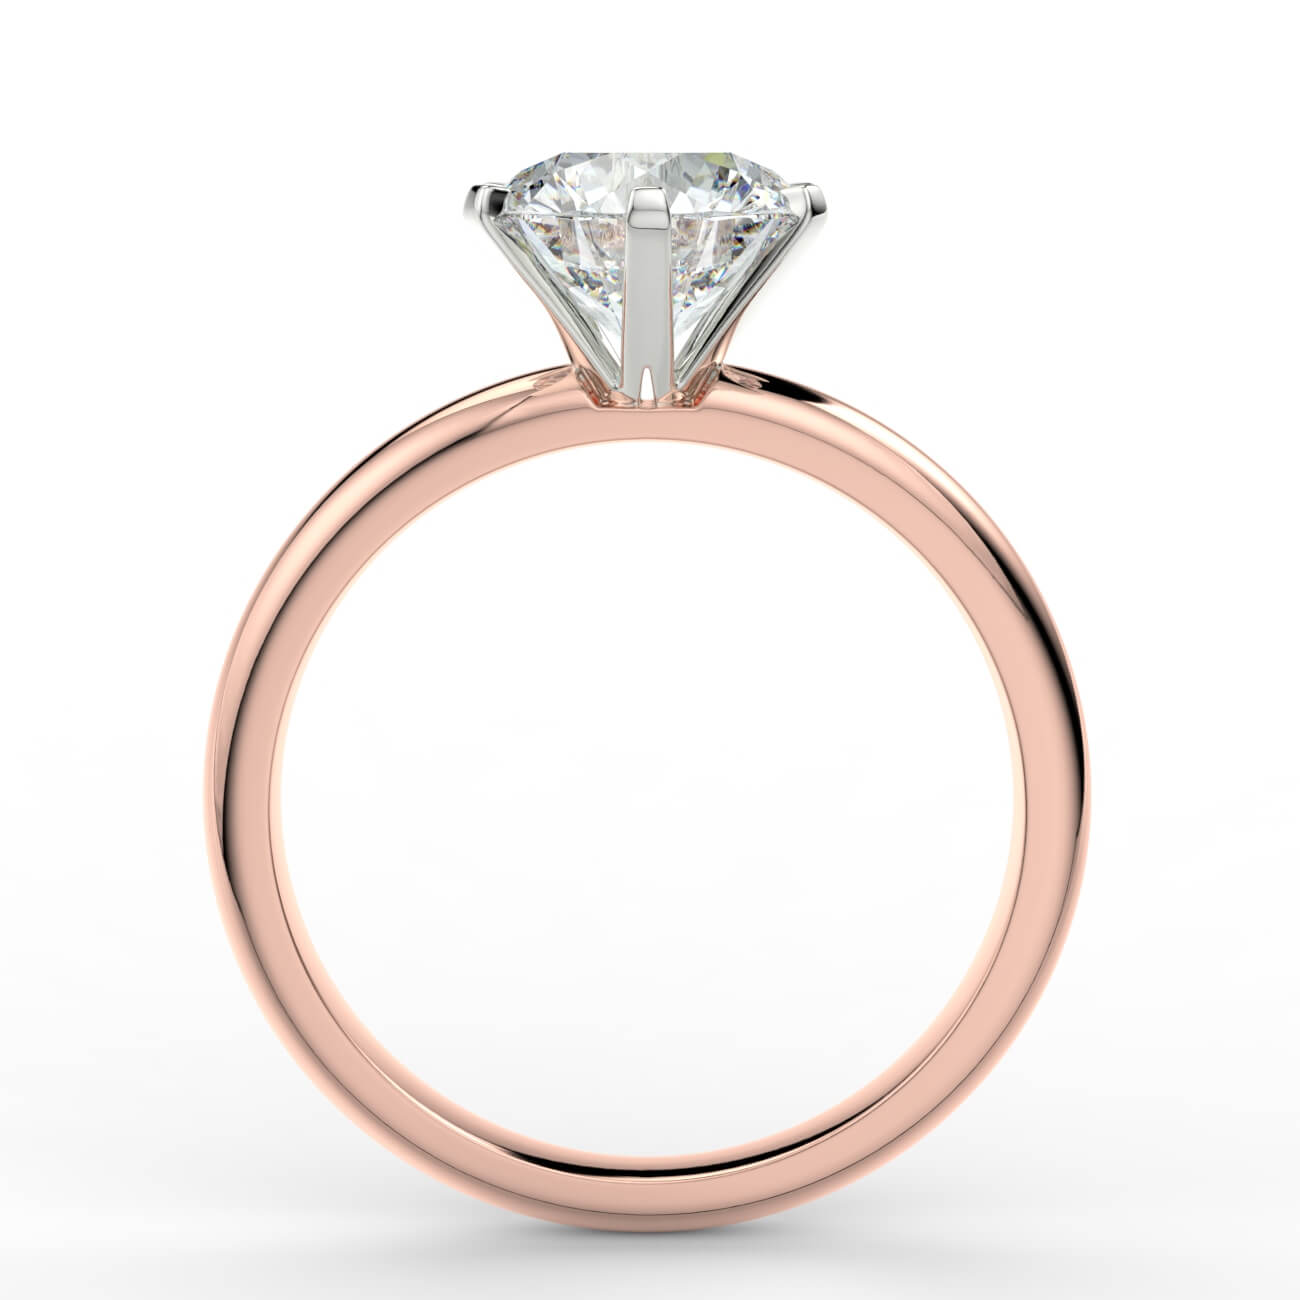 Comfort fit 6 claw solitaire diamond ring in rose and white gold – Australian Diamond Network